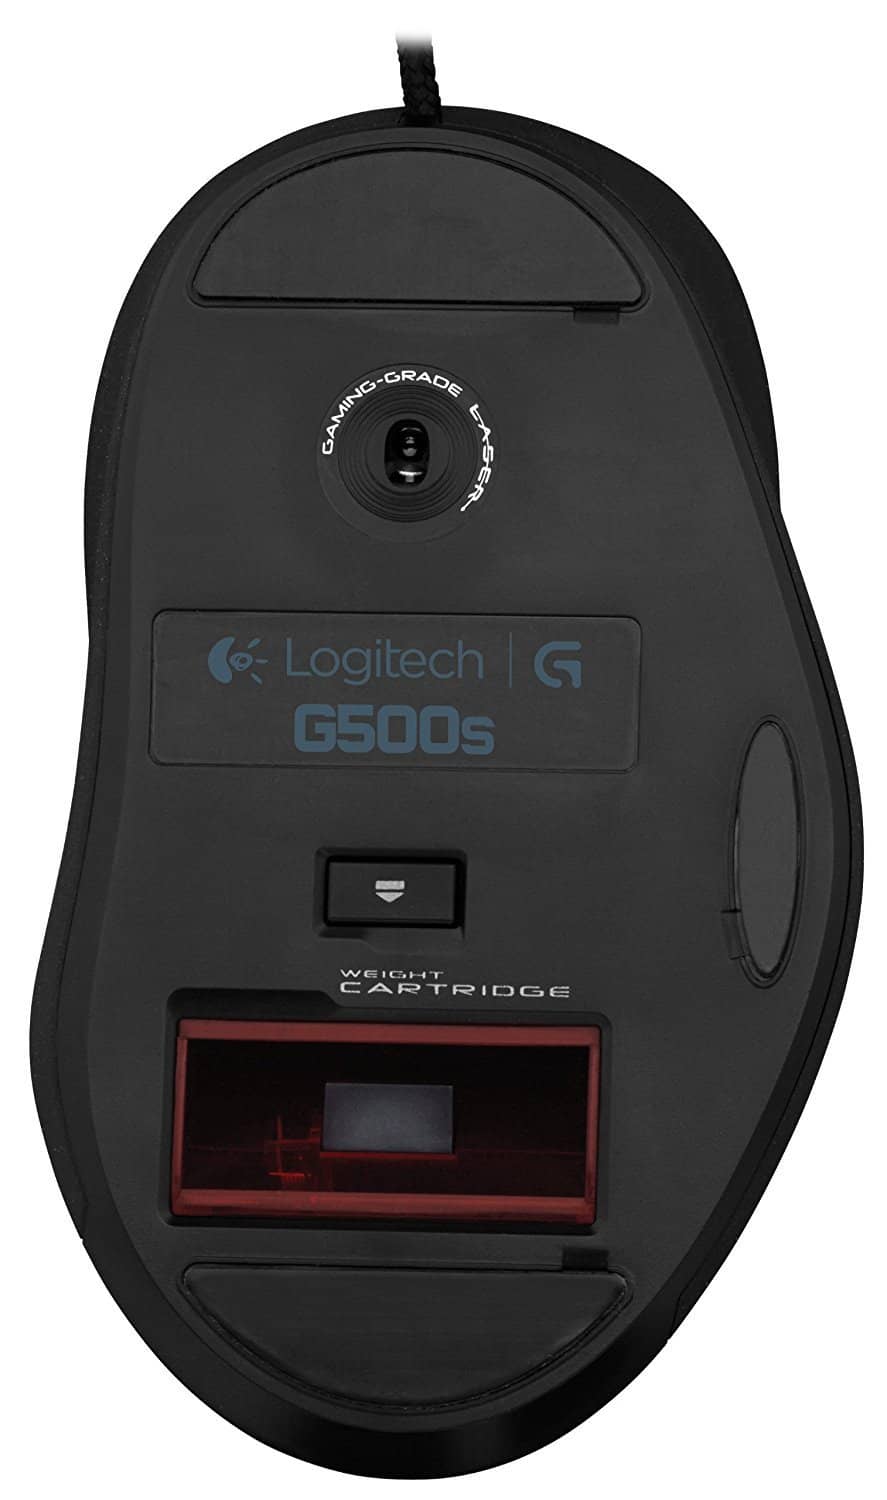 Logitech G500s Laser Gaming Mouse with